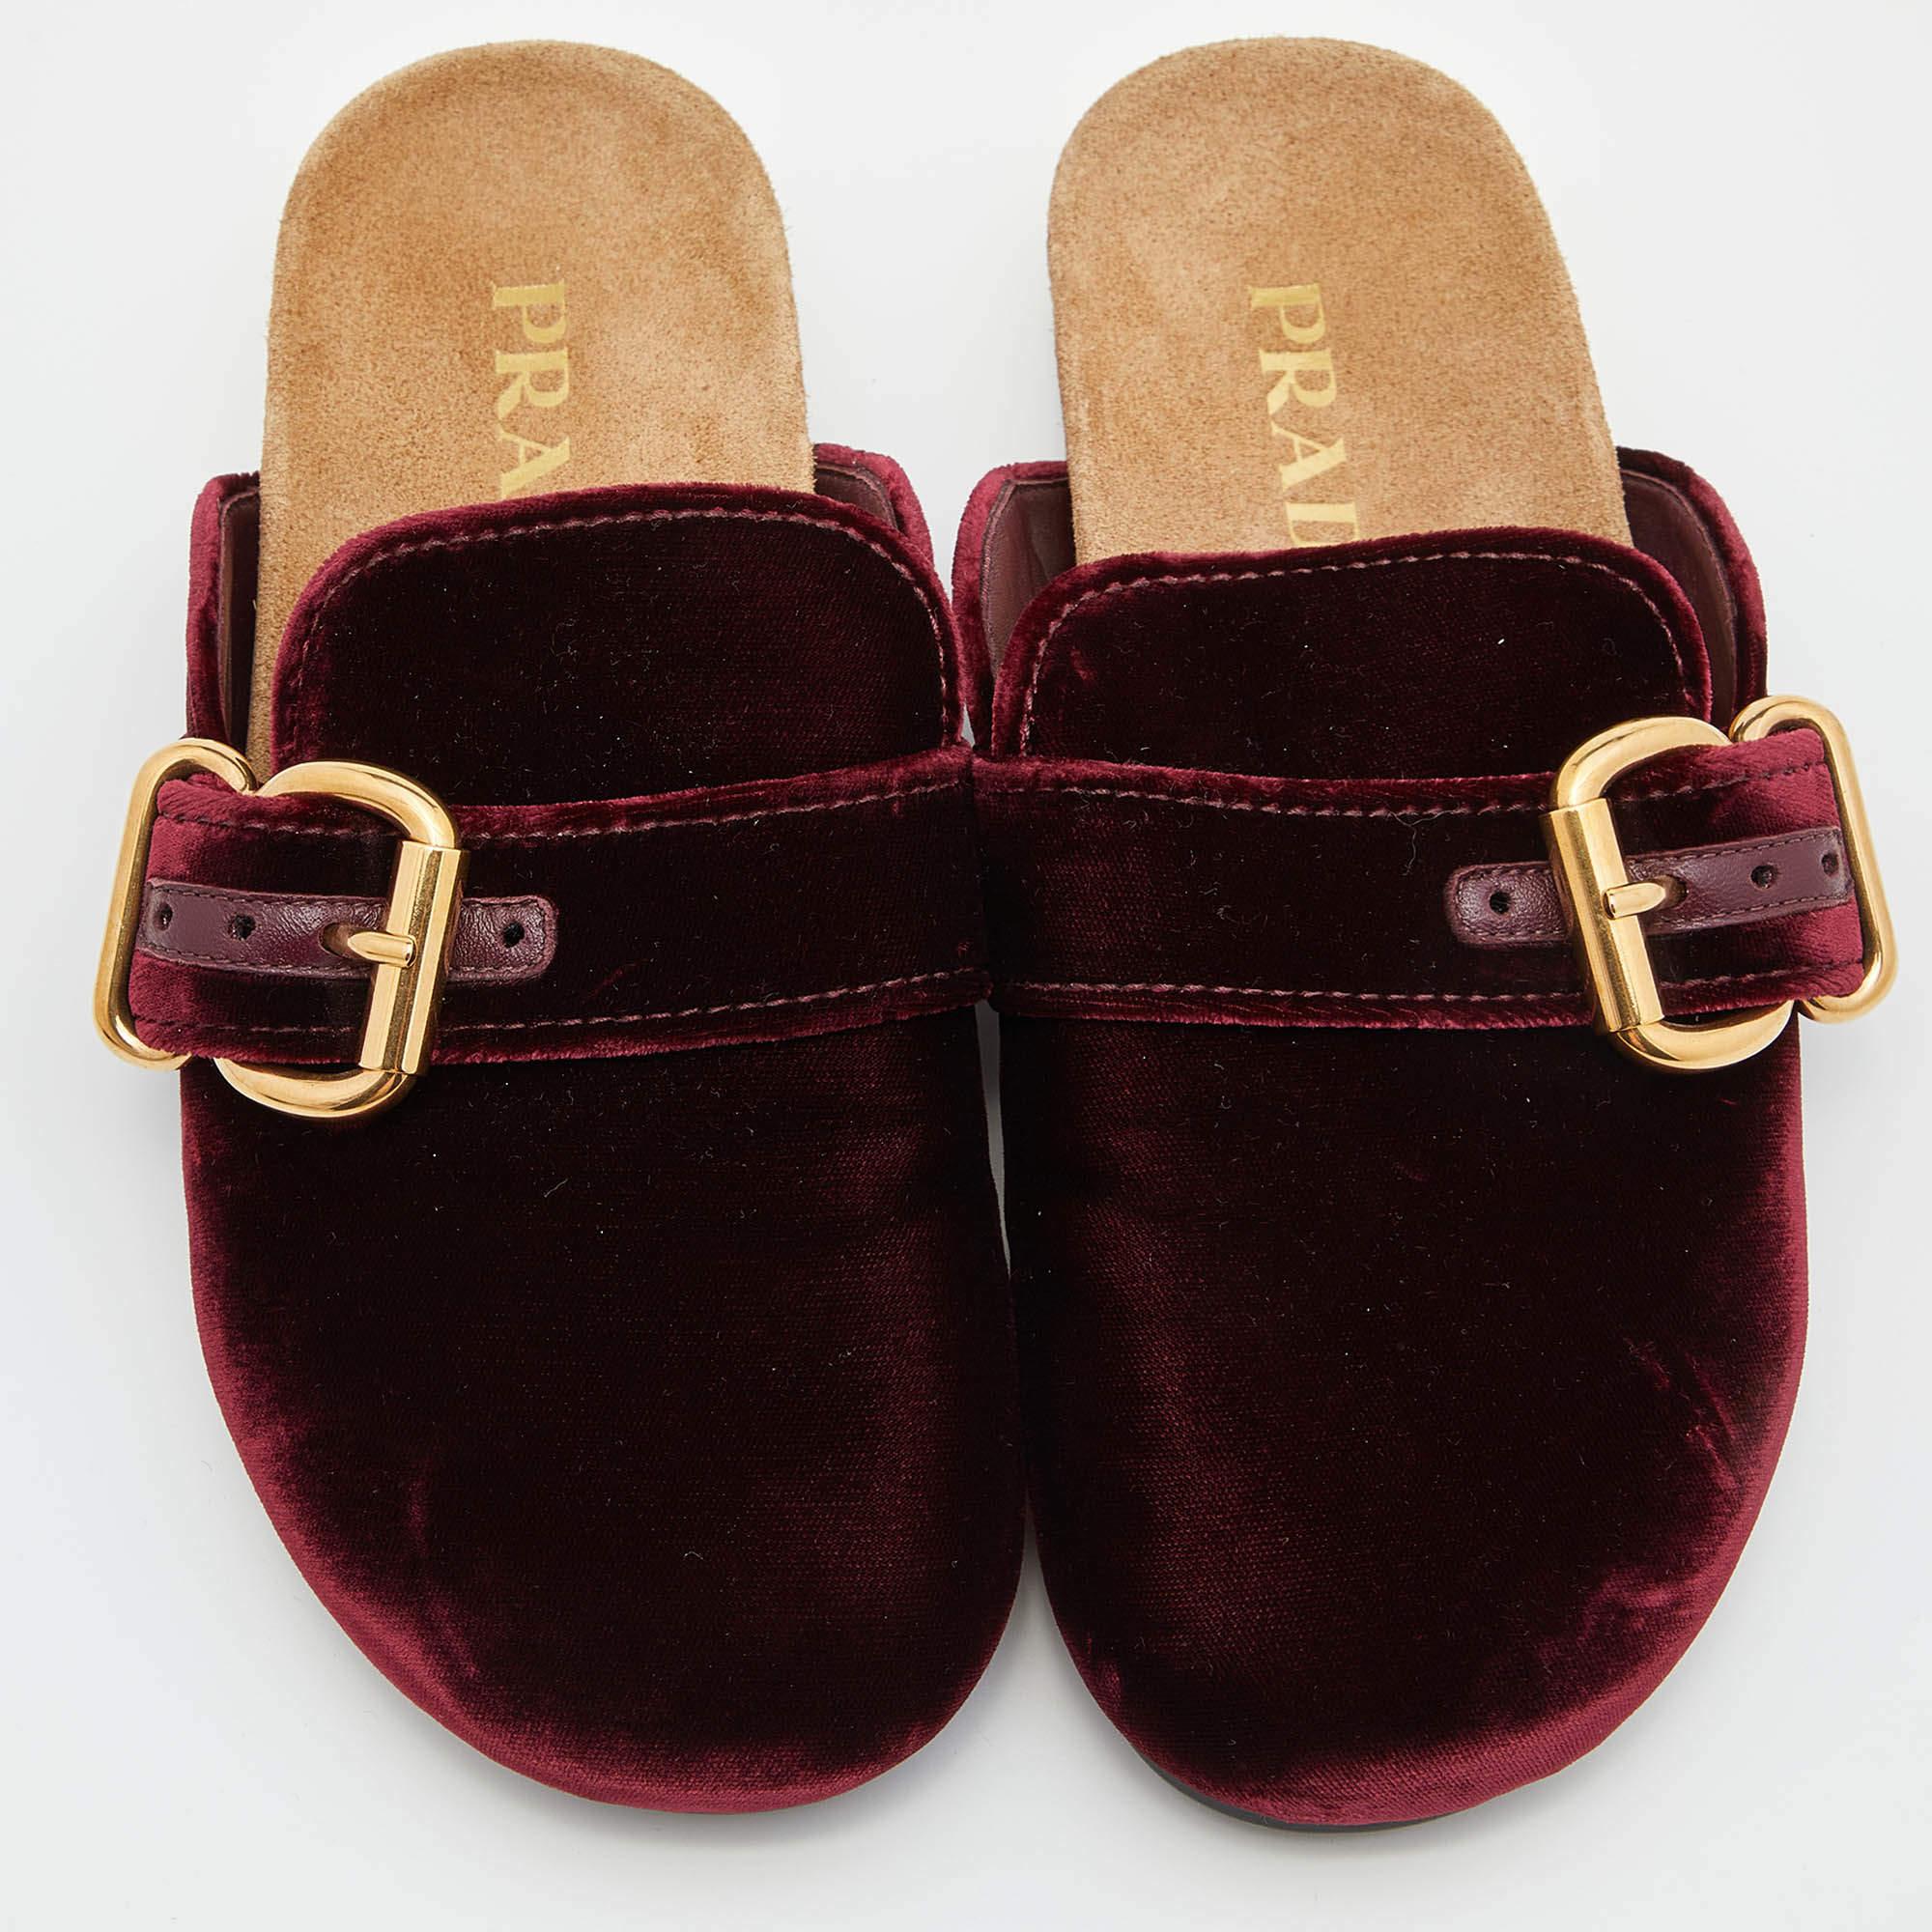 Prada brings you these minimal mules to complement your casual wear. The burgundy velvet construction has a round-toe silhouette and logo detail. Comfortable leather-lined insoles and durable outsoles complete this amazing pair.

